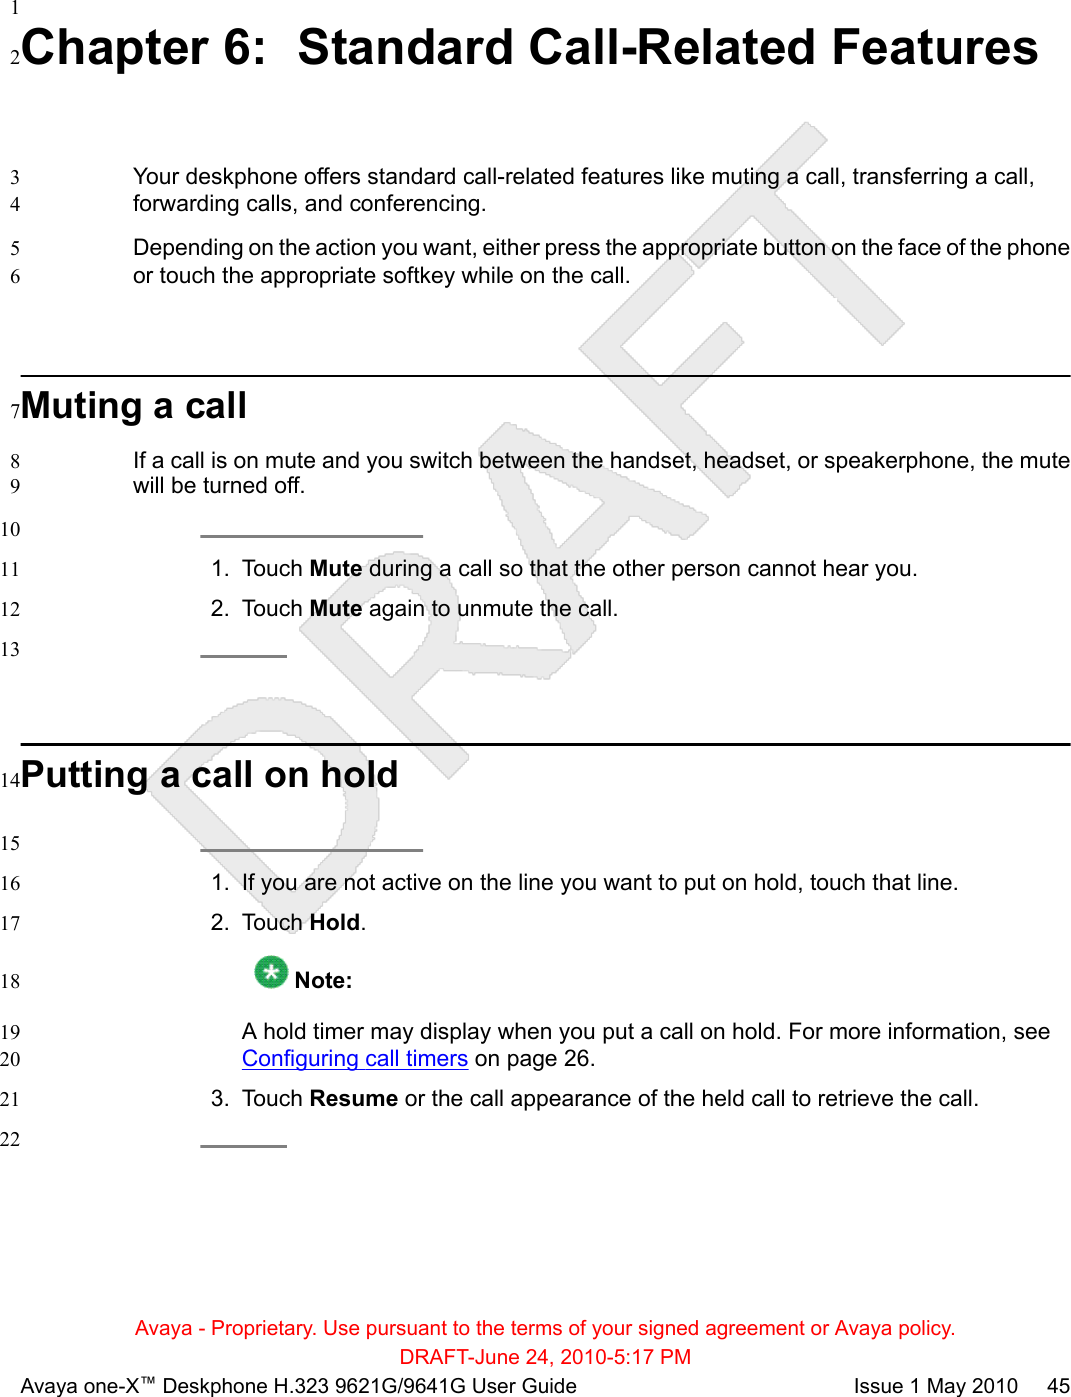 1Chapter 6:  Standard Call-Related Features2Your deskphone offers standard call-related features like muting a call, transferring a call,3forwarding calls, and conferencing.4Depending on the action you want, either press the appropriate button on the face of the phone5or touch the appropriate softkey while on the call.6Muting a call7If a call is on mute and you switch between the handset, headset, or speakerphone, the mute8will be turned off.9101. Touch Mute during a call so that the other person cannot hear you.112. Touch Mute again to unmute the call.1213Putting a call on hold14151. If you are not active on the line you want to put on hold, touch that line.162. Touch Hold.17 Note:18A hold timer may display when you put a call on hold. For more information, see 19Configuring call timers on page 26.203. Touch Resume or the call appearance of the held call to retrieve the call.2122Avaya - Proprietary. Use pursuant to the terms of your signed agreement or Avaya policy.DRAFT-June 24, 2010-5:17 PMAvaya one-X™ Deskphone H.323 9621G/9641G User Guide Issue 1 May 2010     45